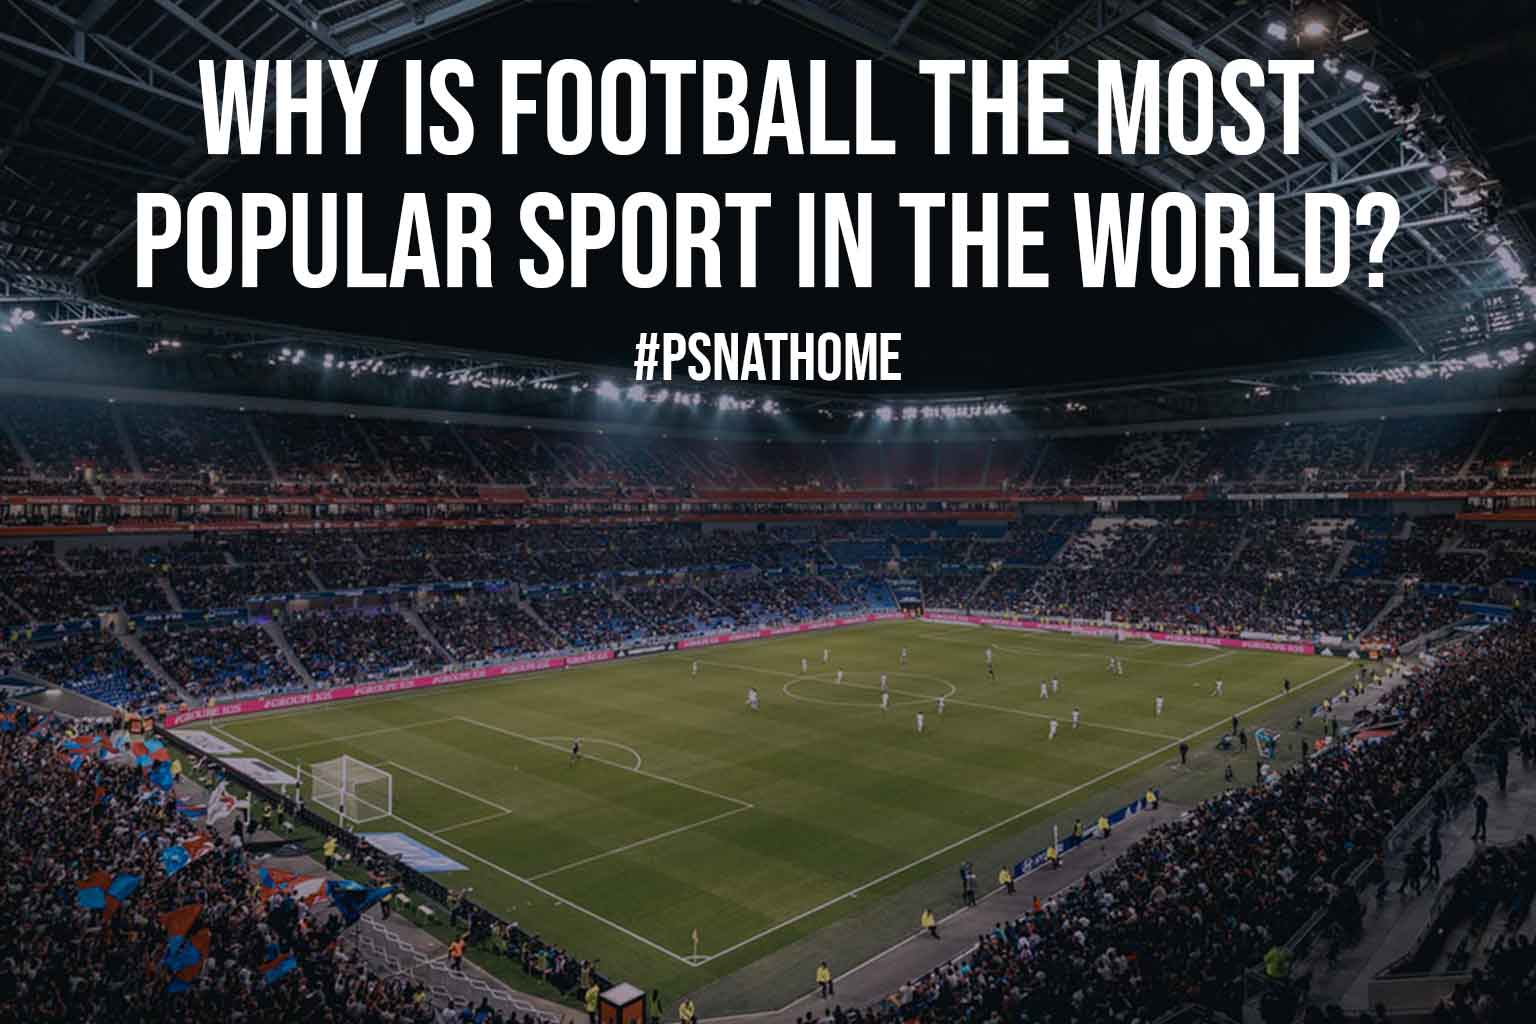 Why is Football the Most Popular Sport in the World?